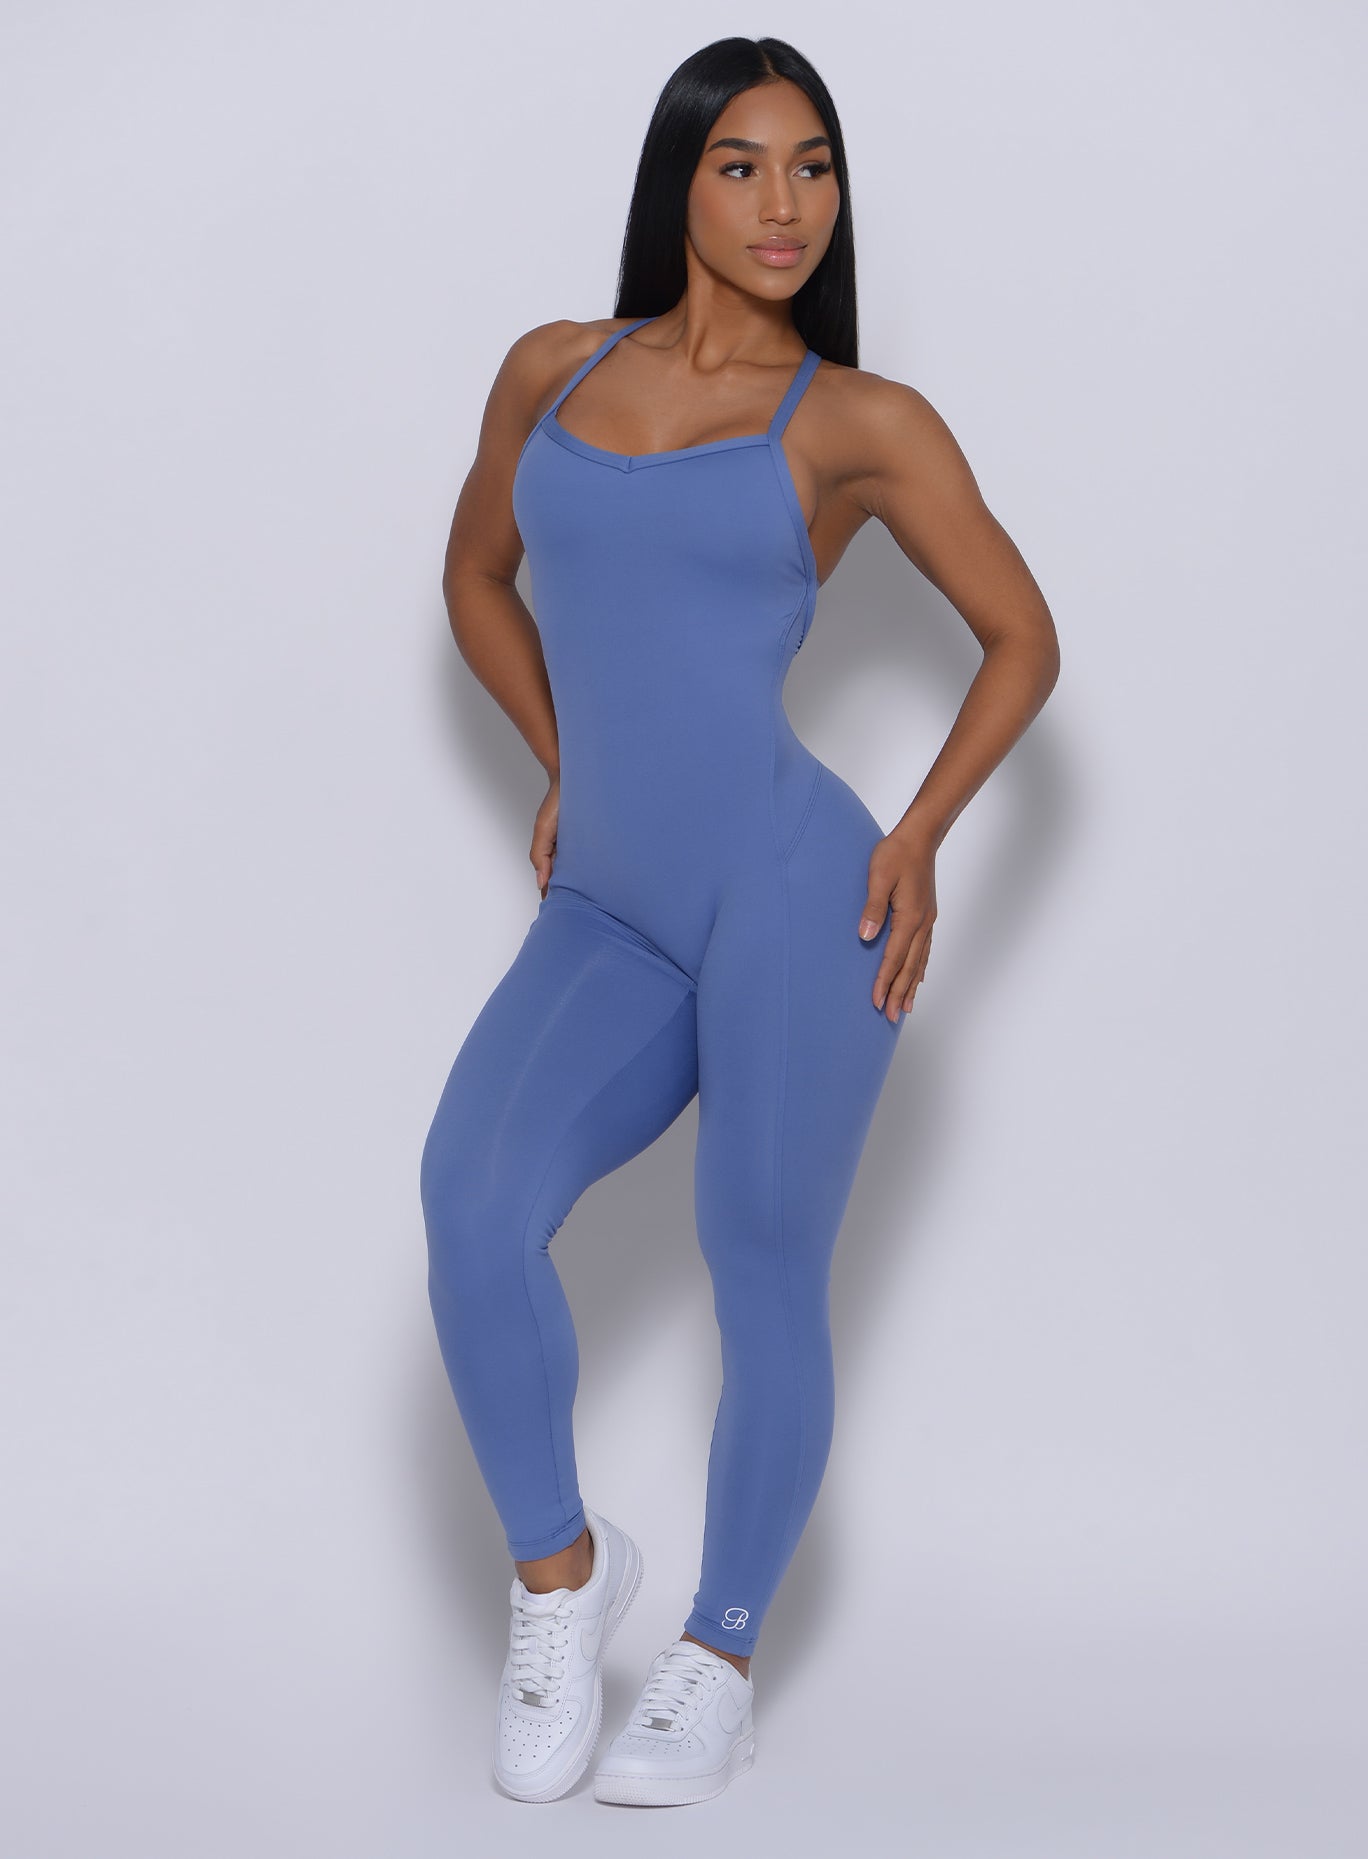 Front profile picture of a model with her hands on waist wearing our sculpted bodysuit in denim blue color 